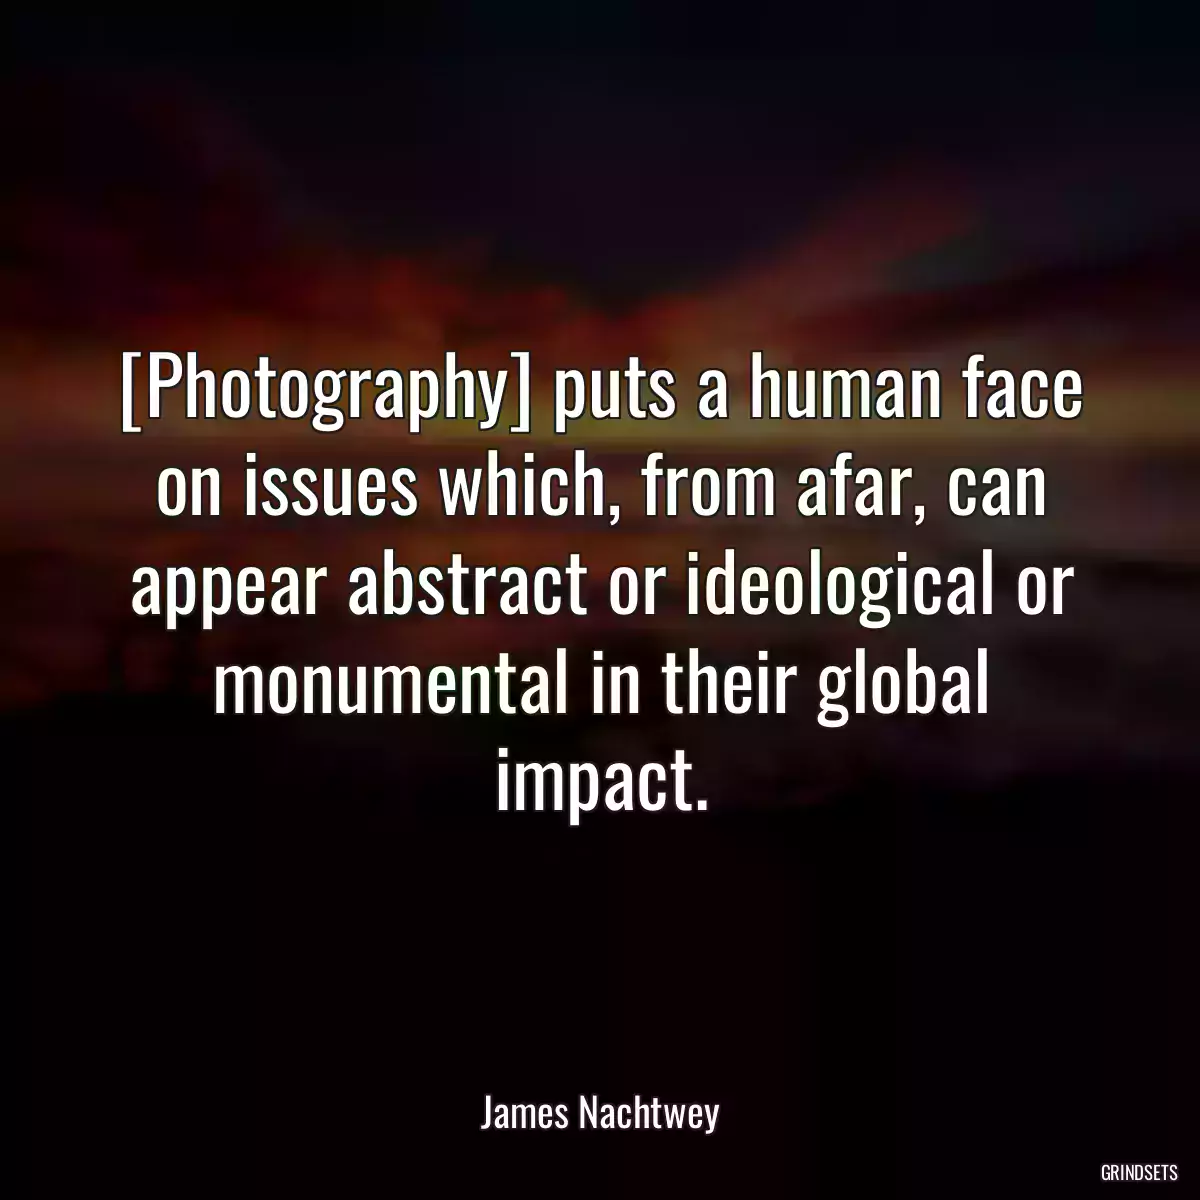 [Photography] puts a human face on issues which, from afar, can appear abstract or ideological or monumental in their global impact.